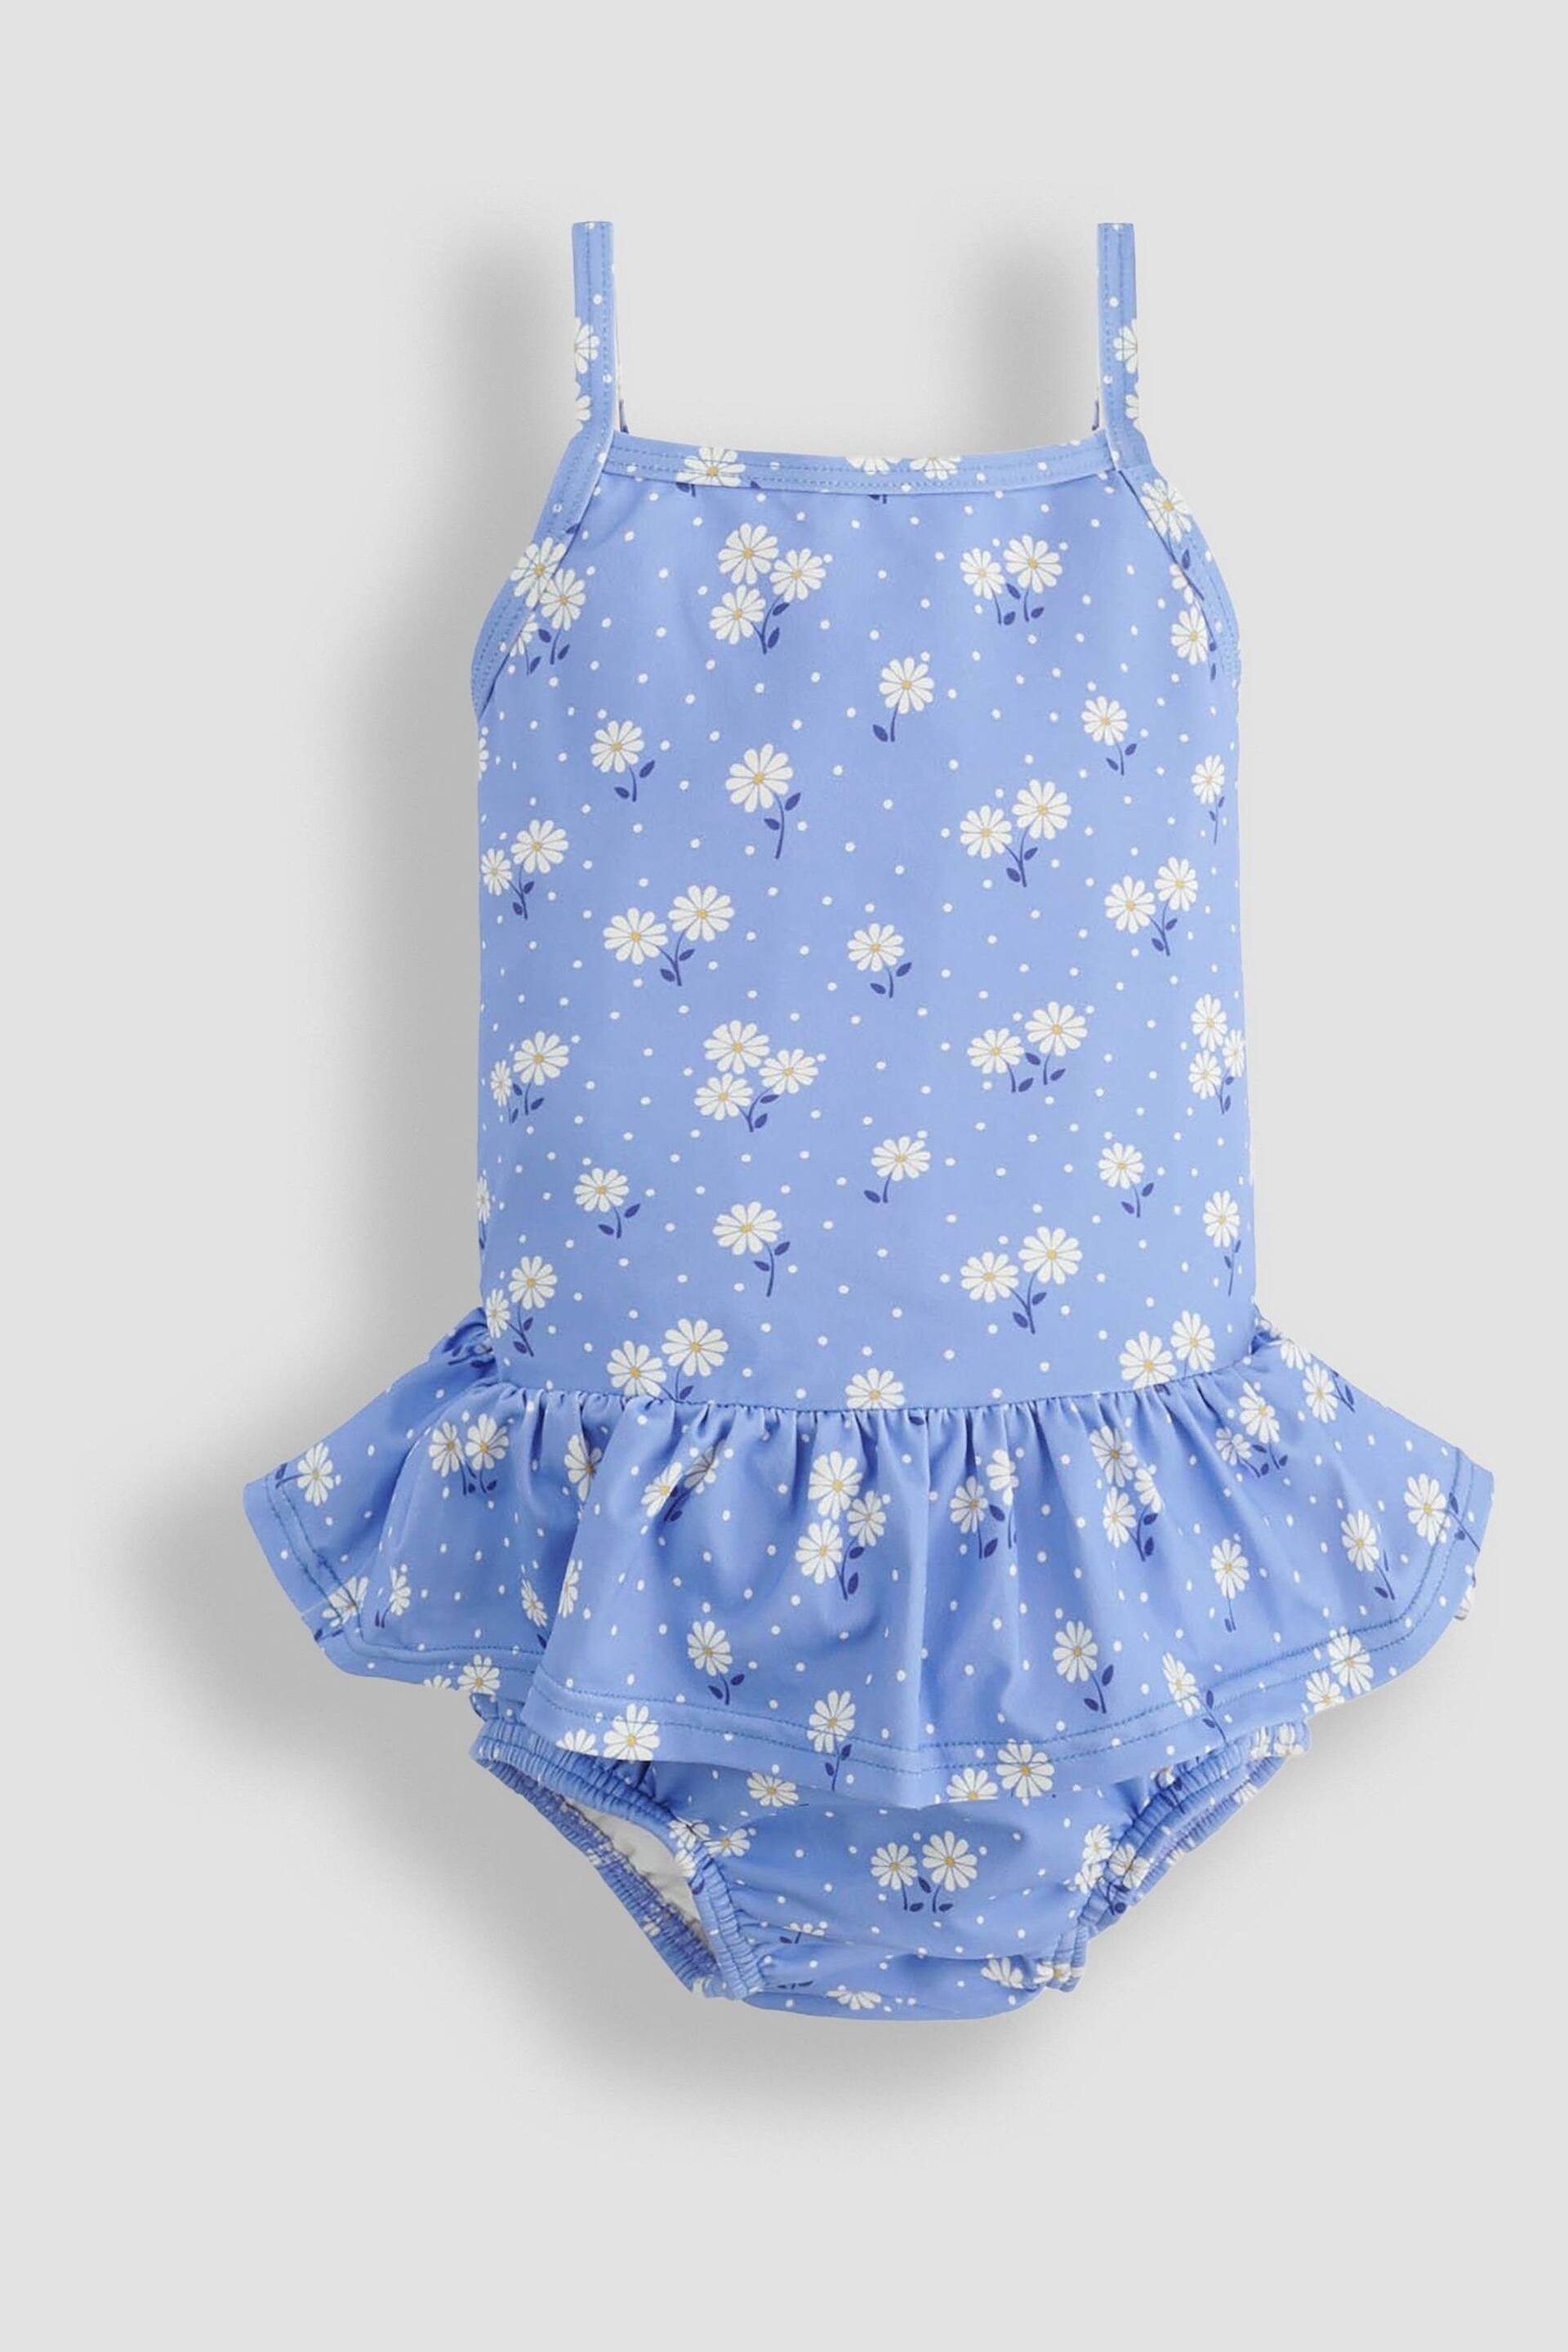 JoJo Maman Bébé Blue Daisy Swimsuit With Integral Nappy - Image 1 of 3